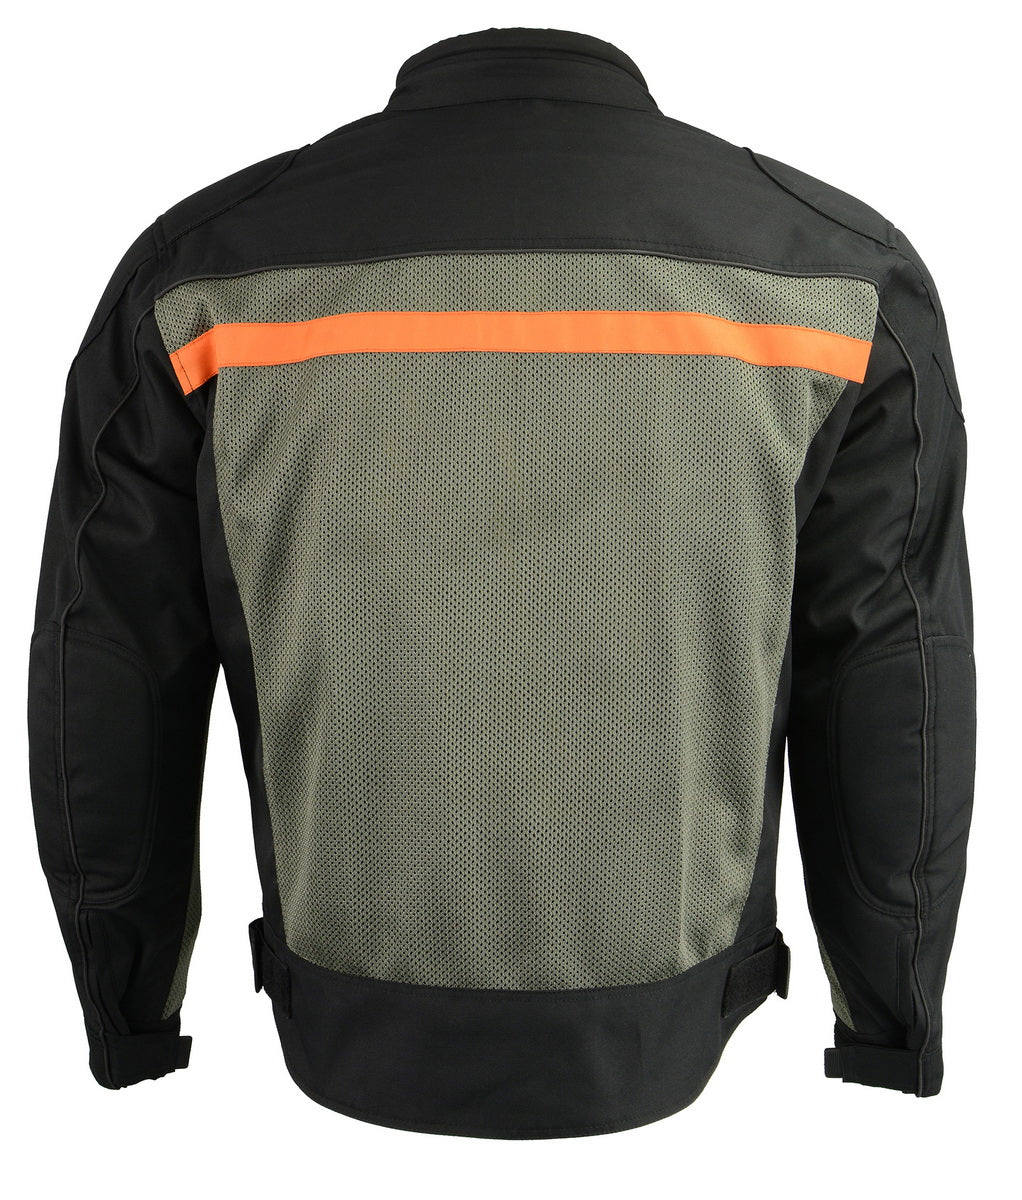 M Boss Motorcycle Apparel BOS11707 Men's Armored Black and Grey Nylon and Mesh Racer Jacket